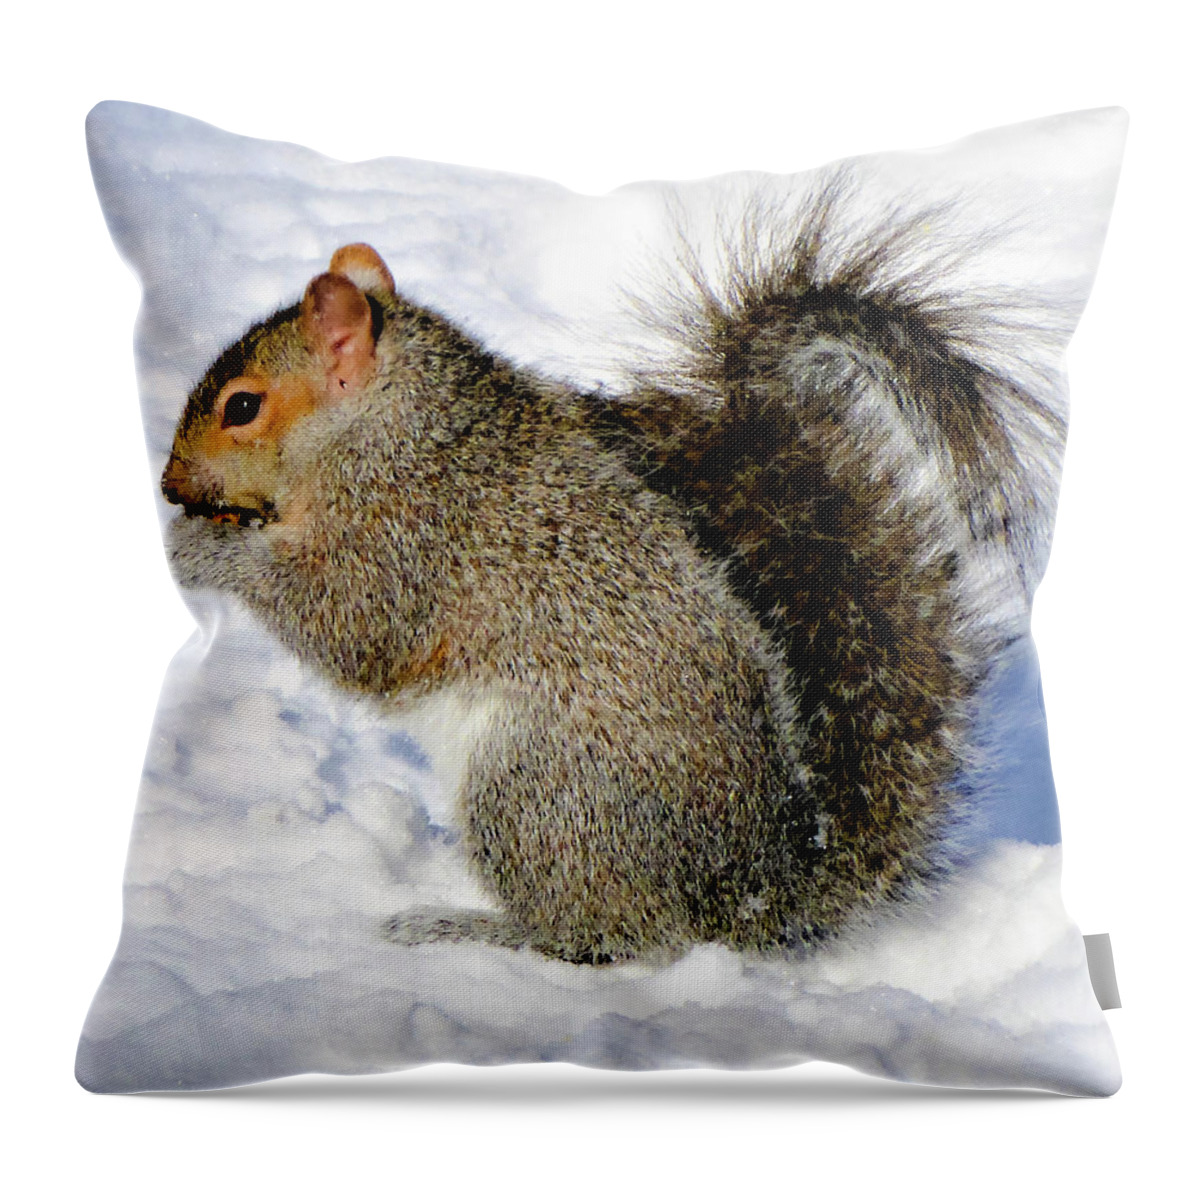 Squirrel Throw Pillow featuring the photograph Squirrel in Winter by Cristina Stefan